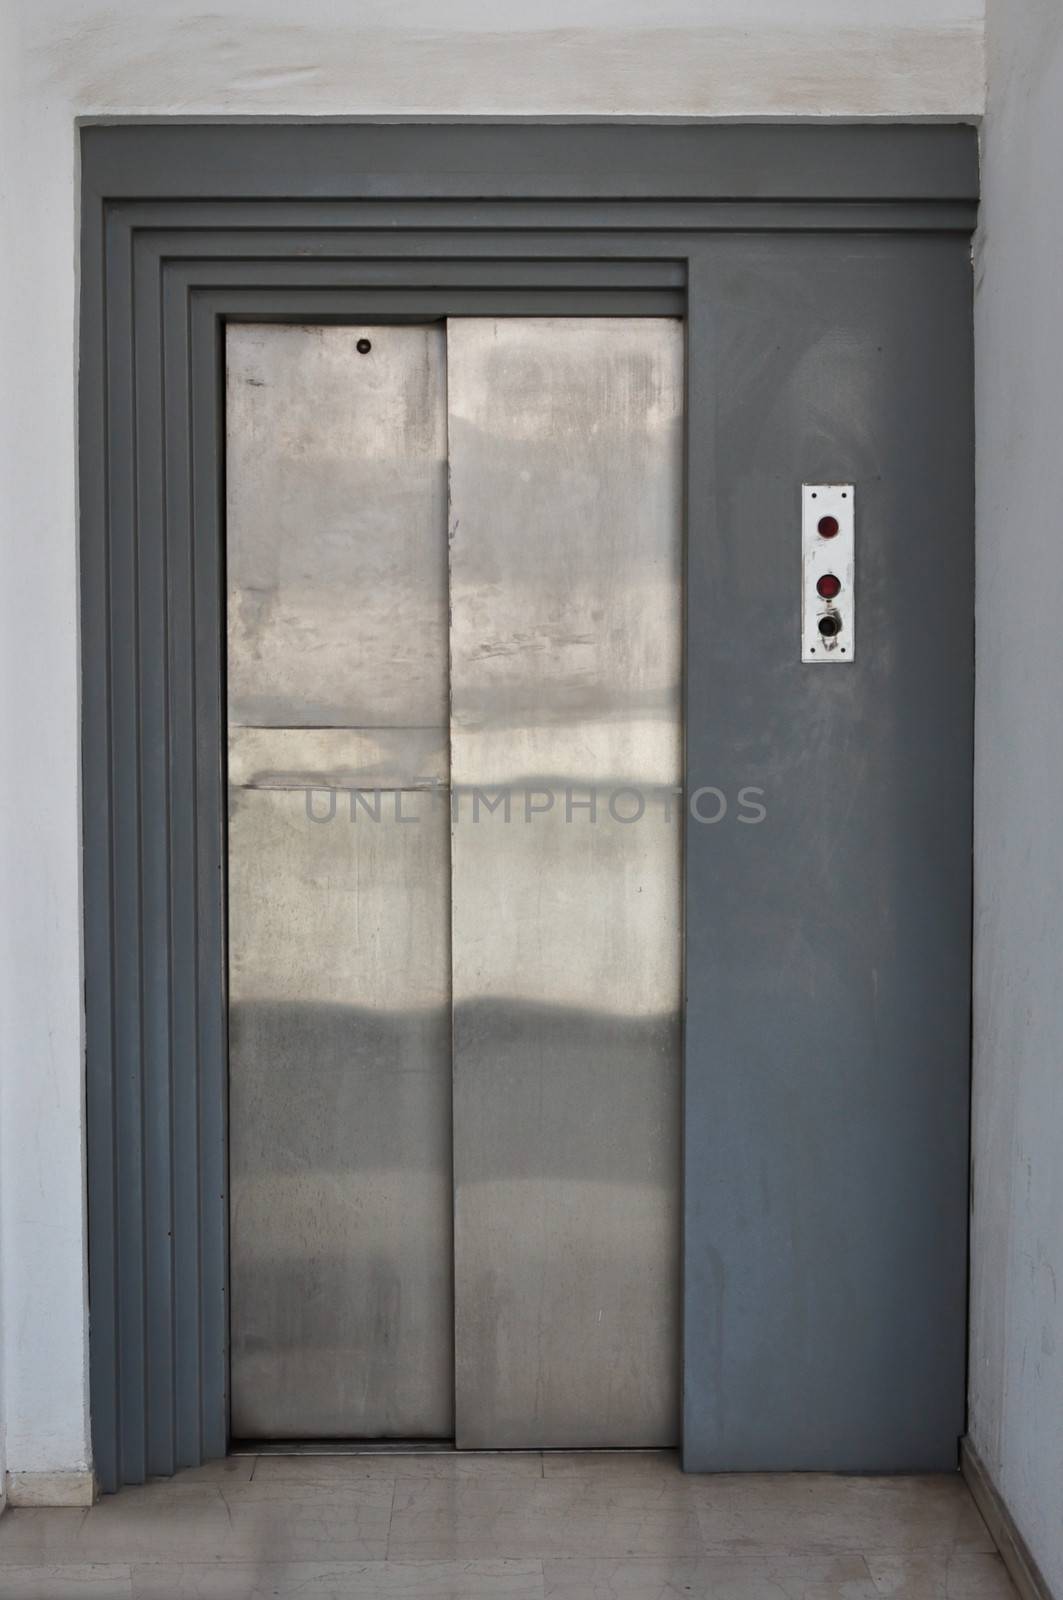 Elevator lift with metal sliding doors and control buttons.